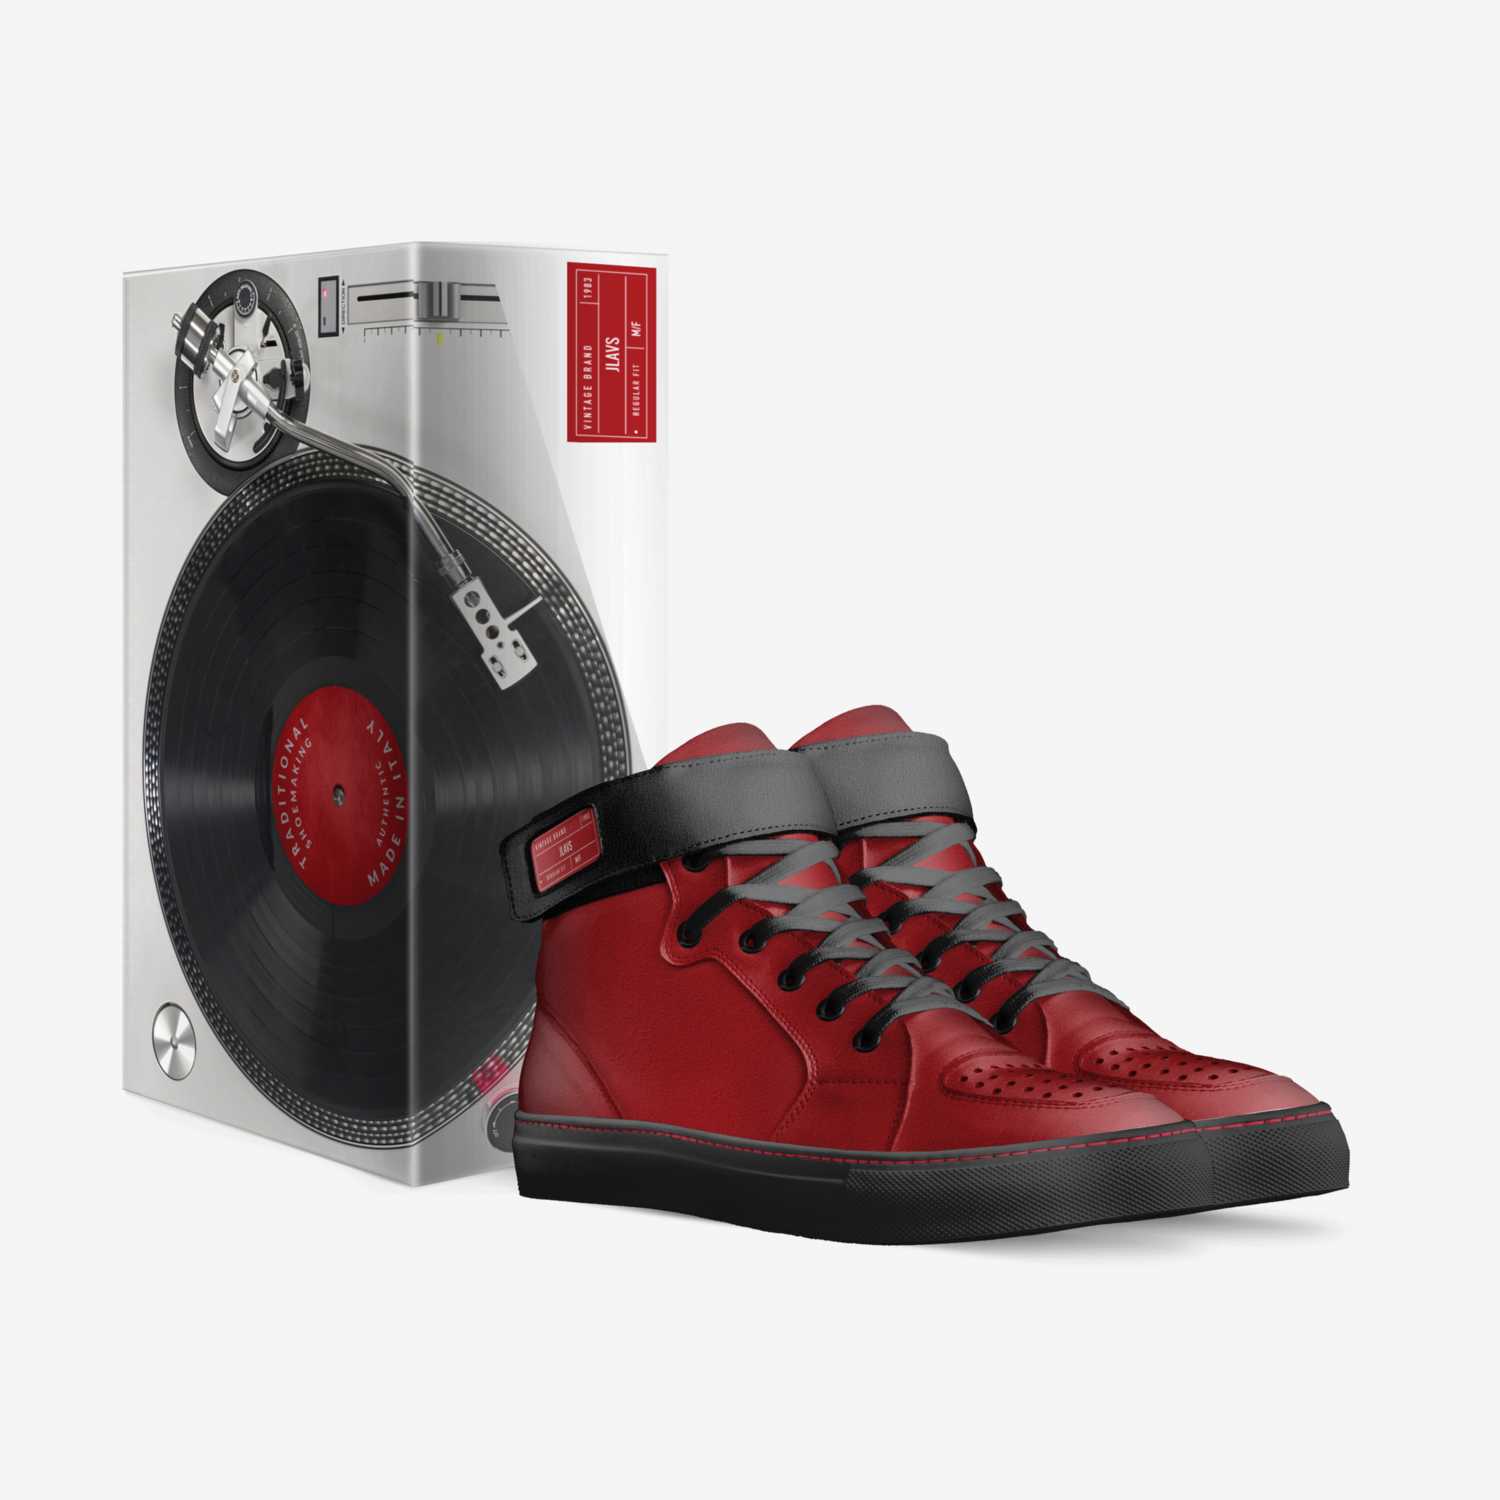 JLavs custom made in Italy shoes by Jarrad Lavoie | Box view